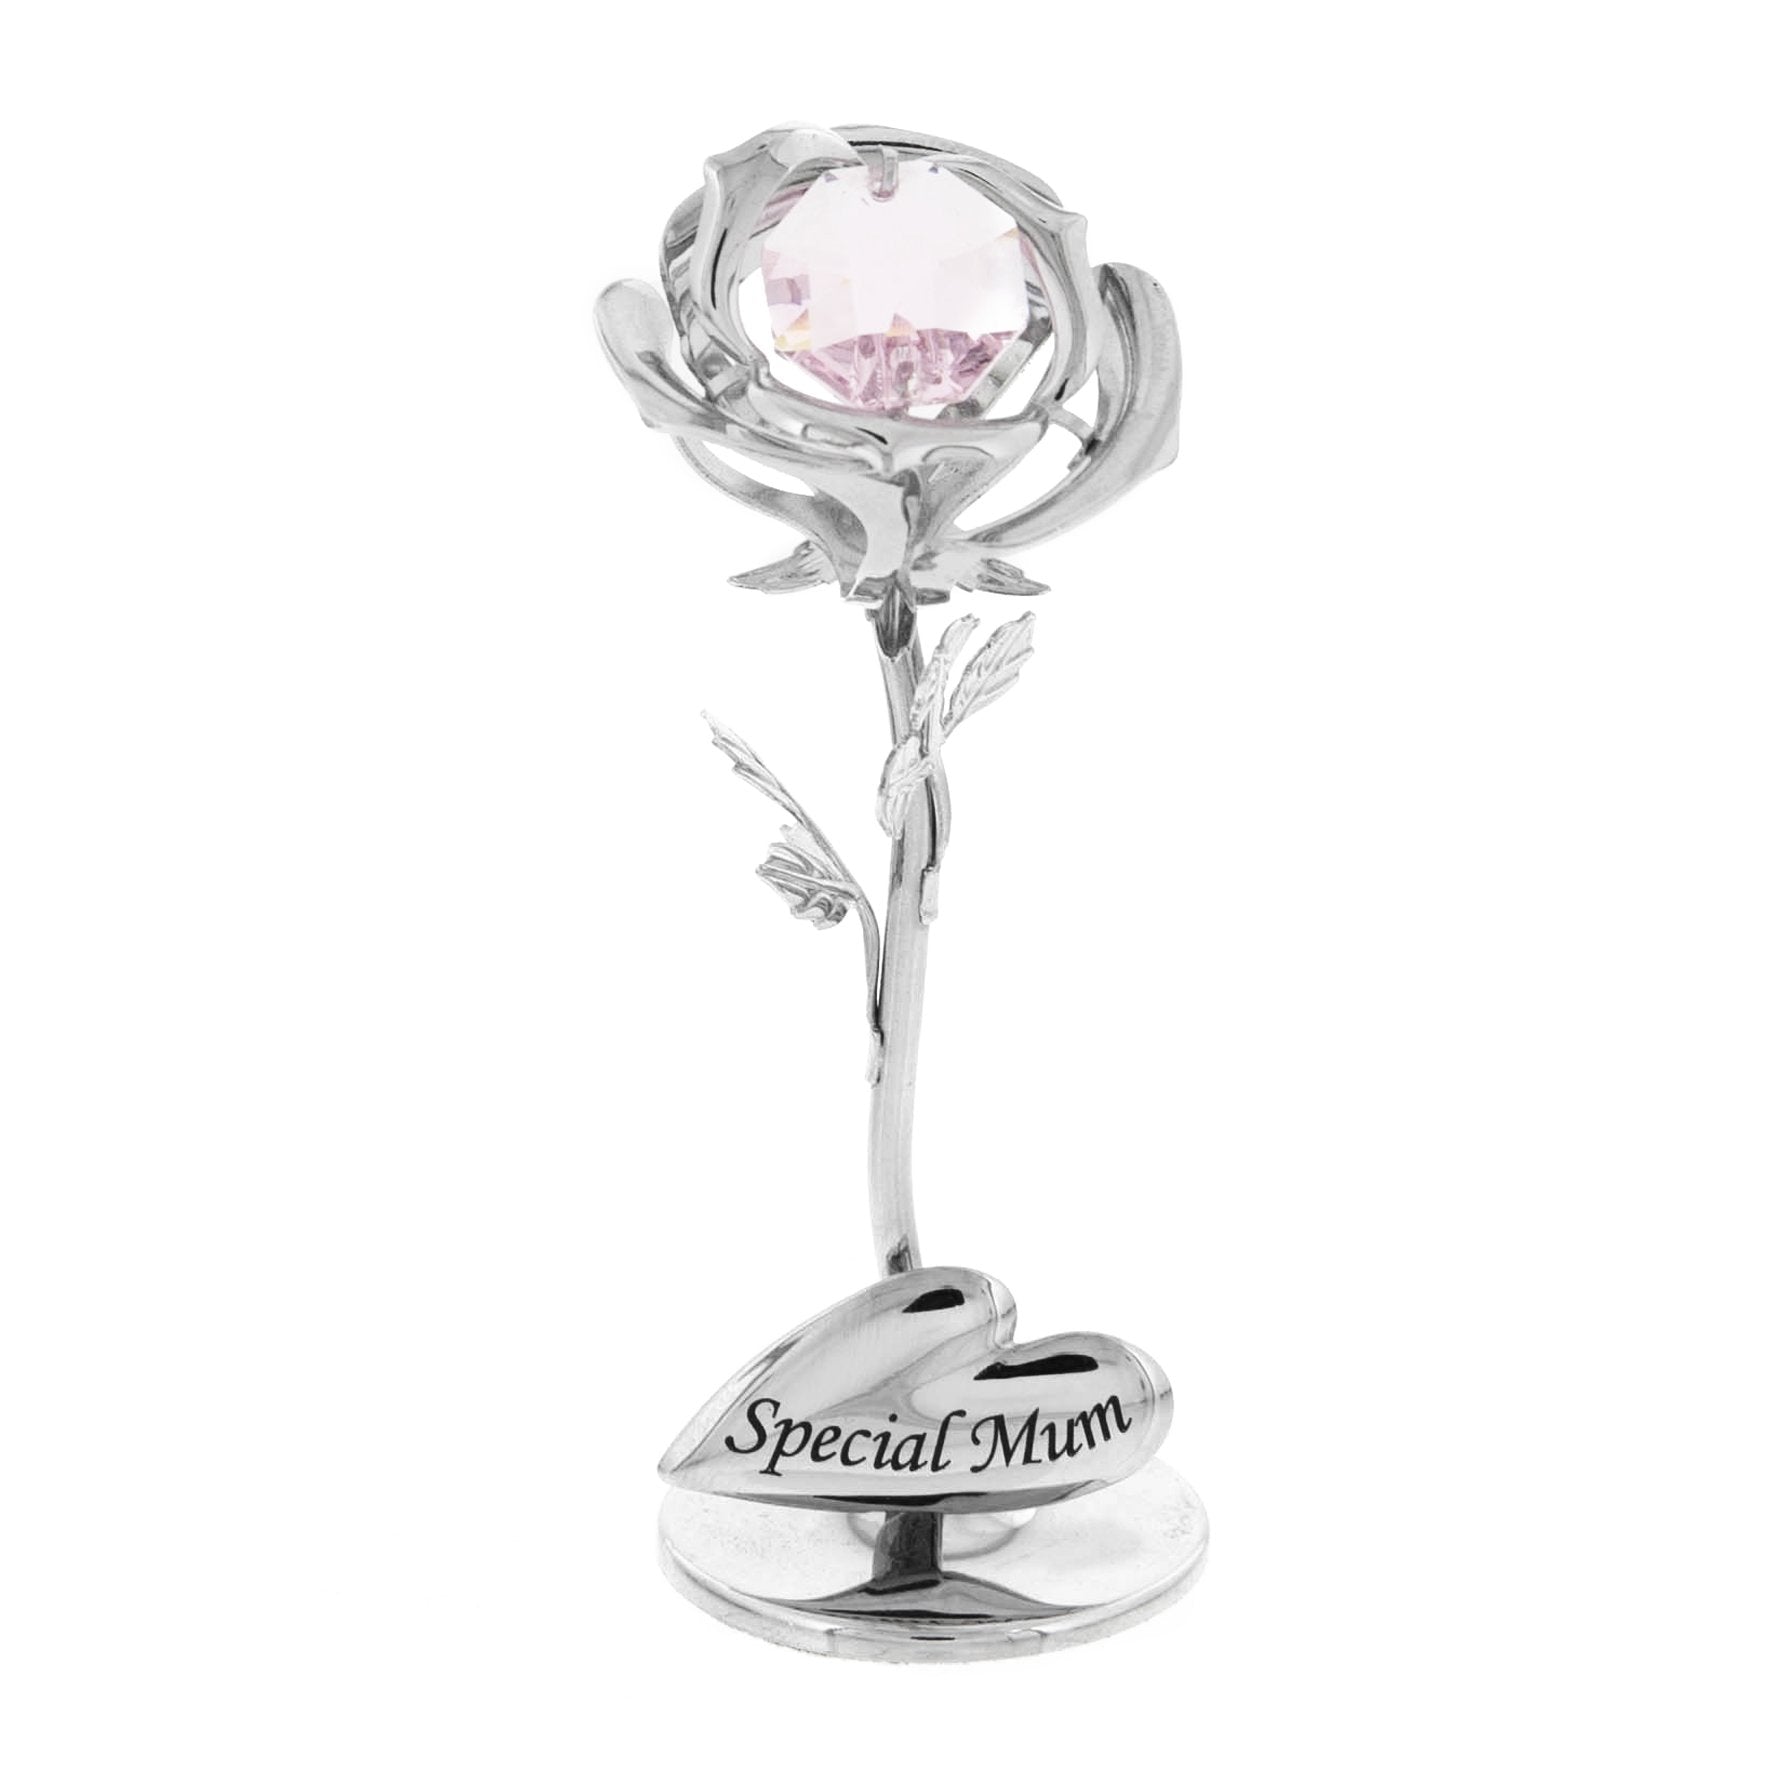 Crystocraft-Rose-Ornament-With-Special-Mum-Inscription-&-Inset-Swarovski-Crystal